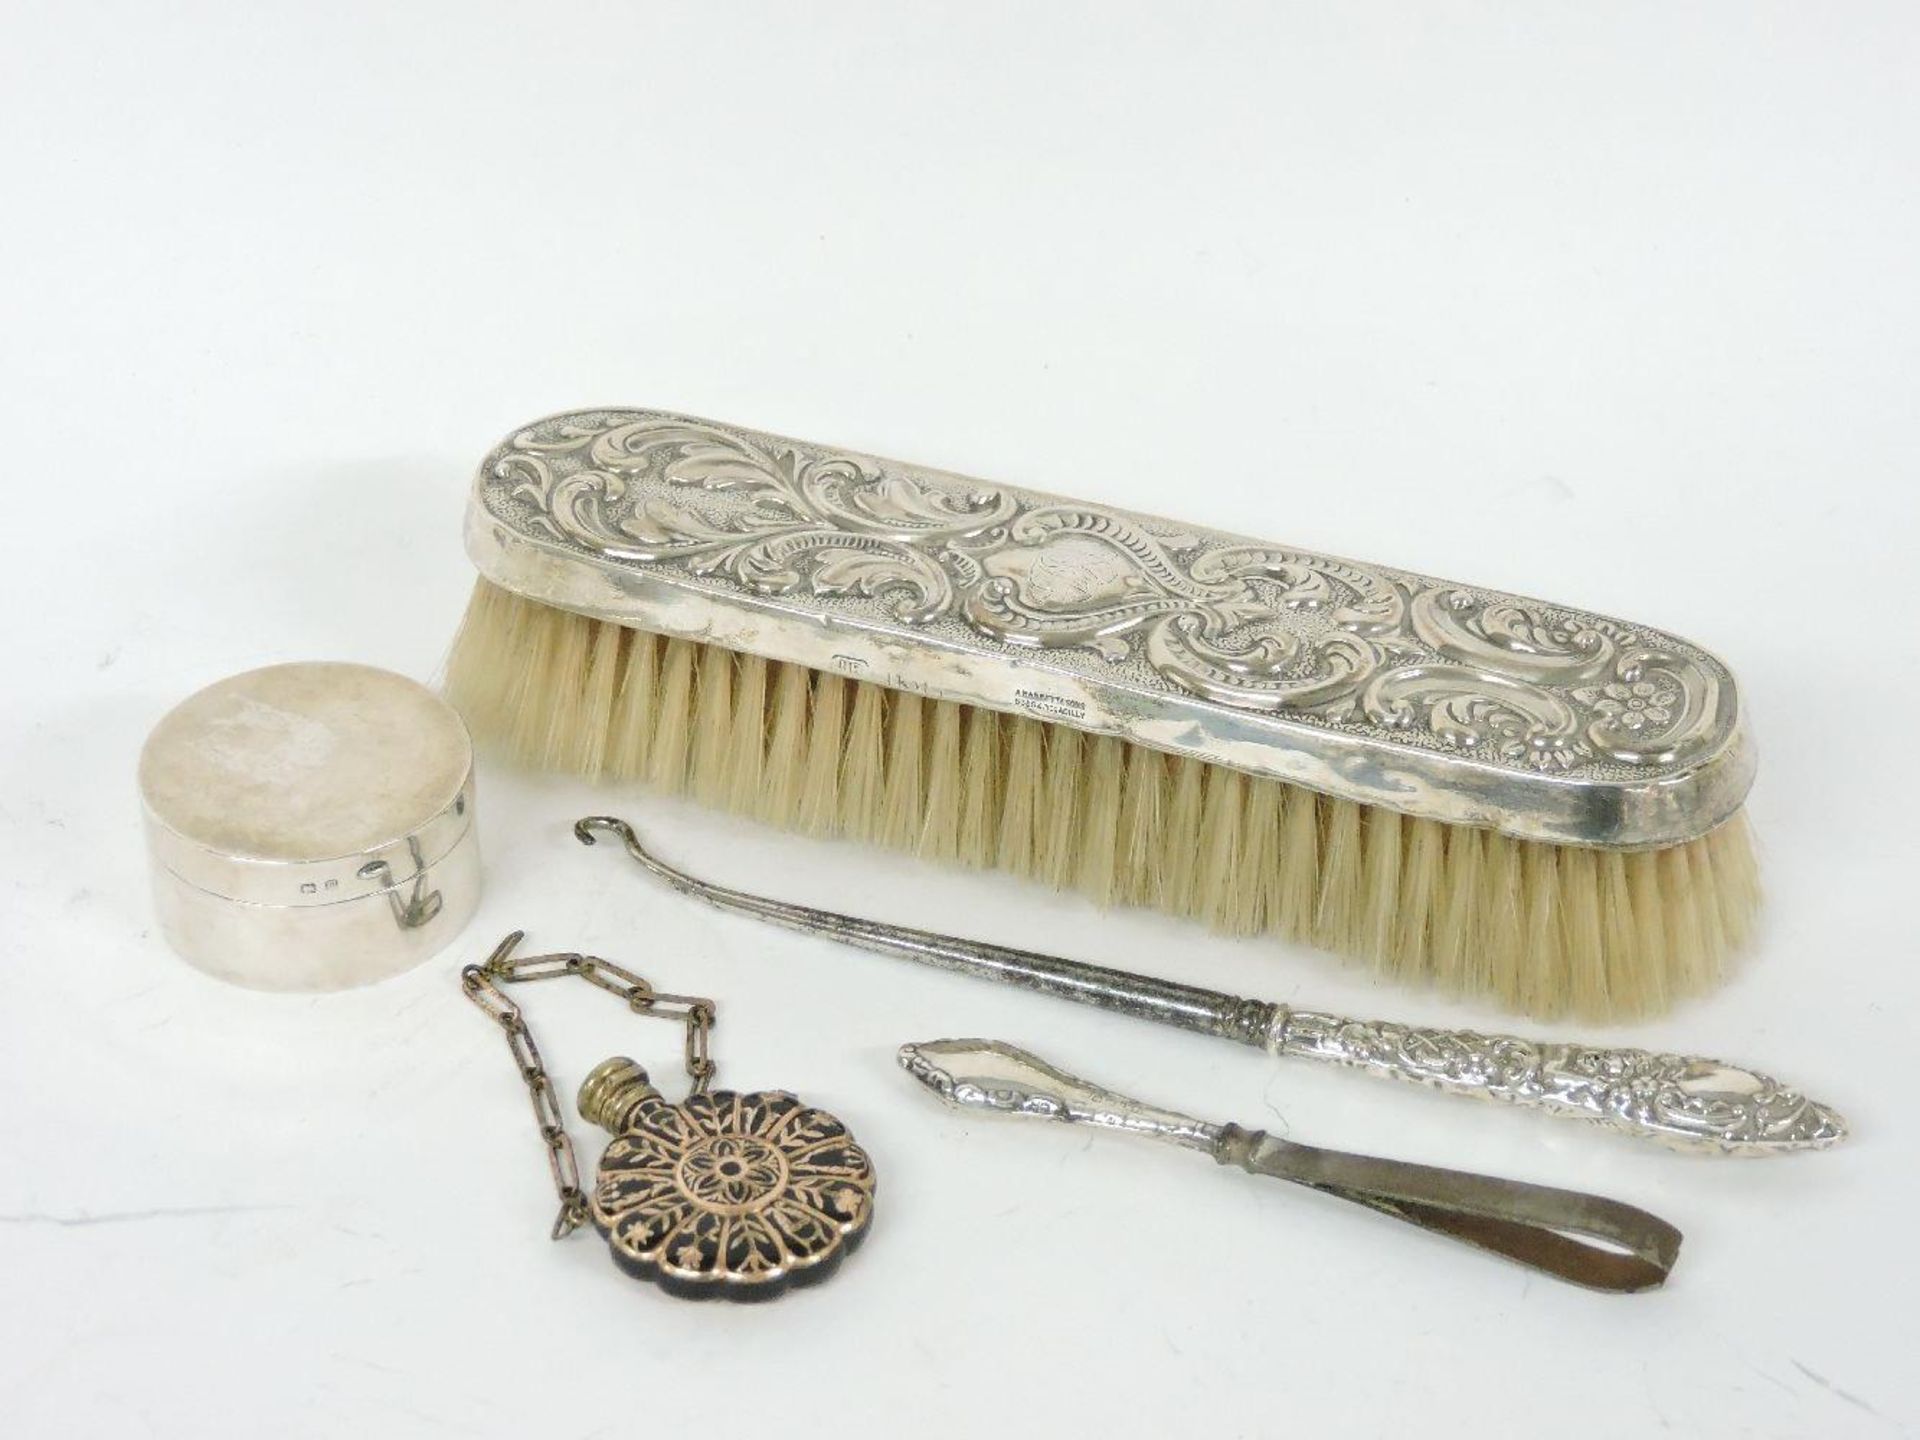 A Toledo ware scent bottle, a cylindrical silver pill pot, button hook, tweezers, and brush